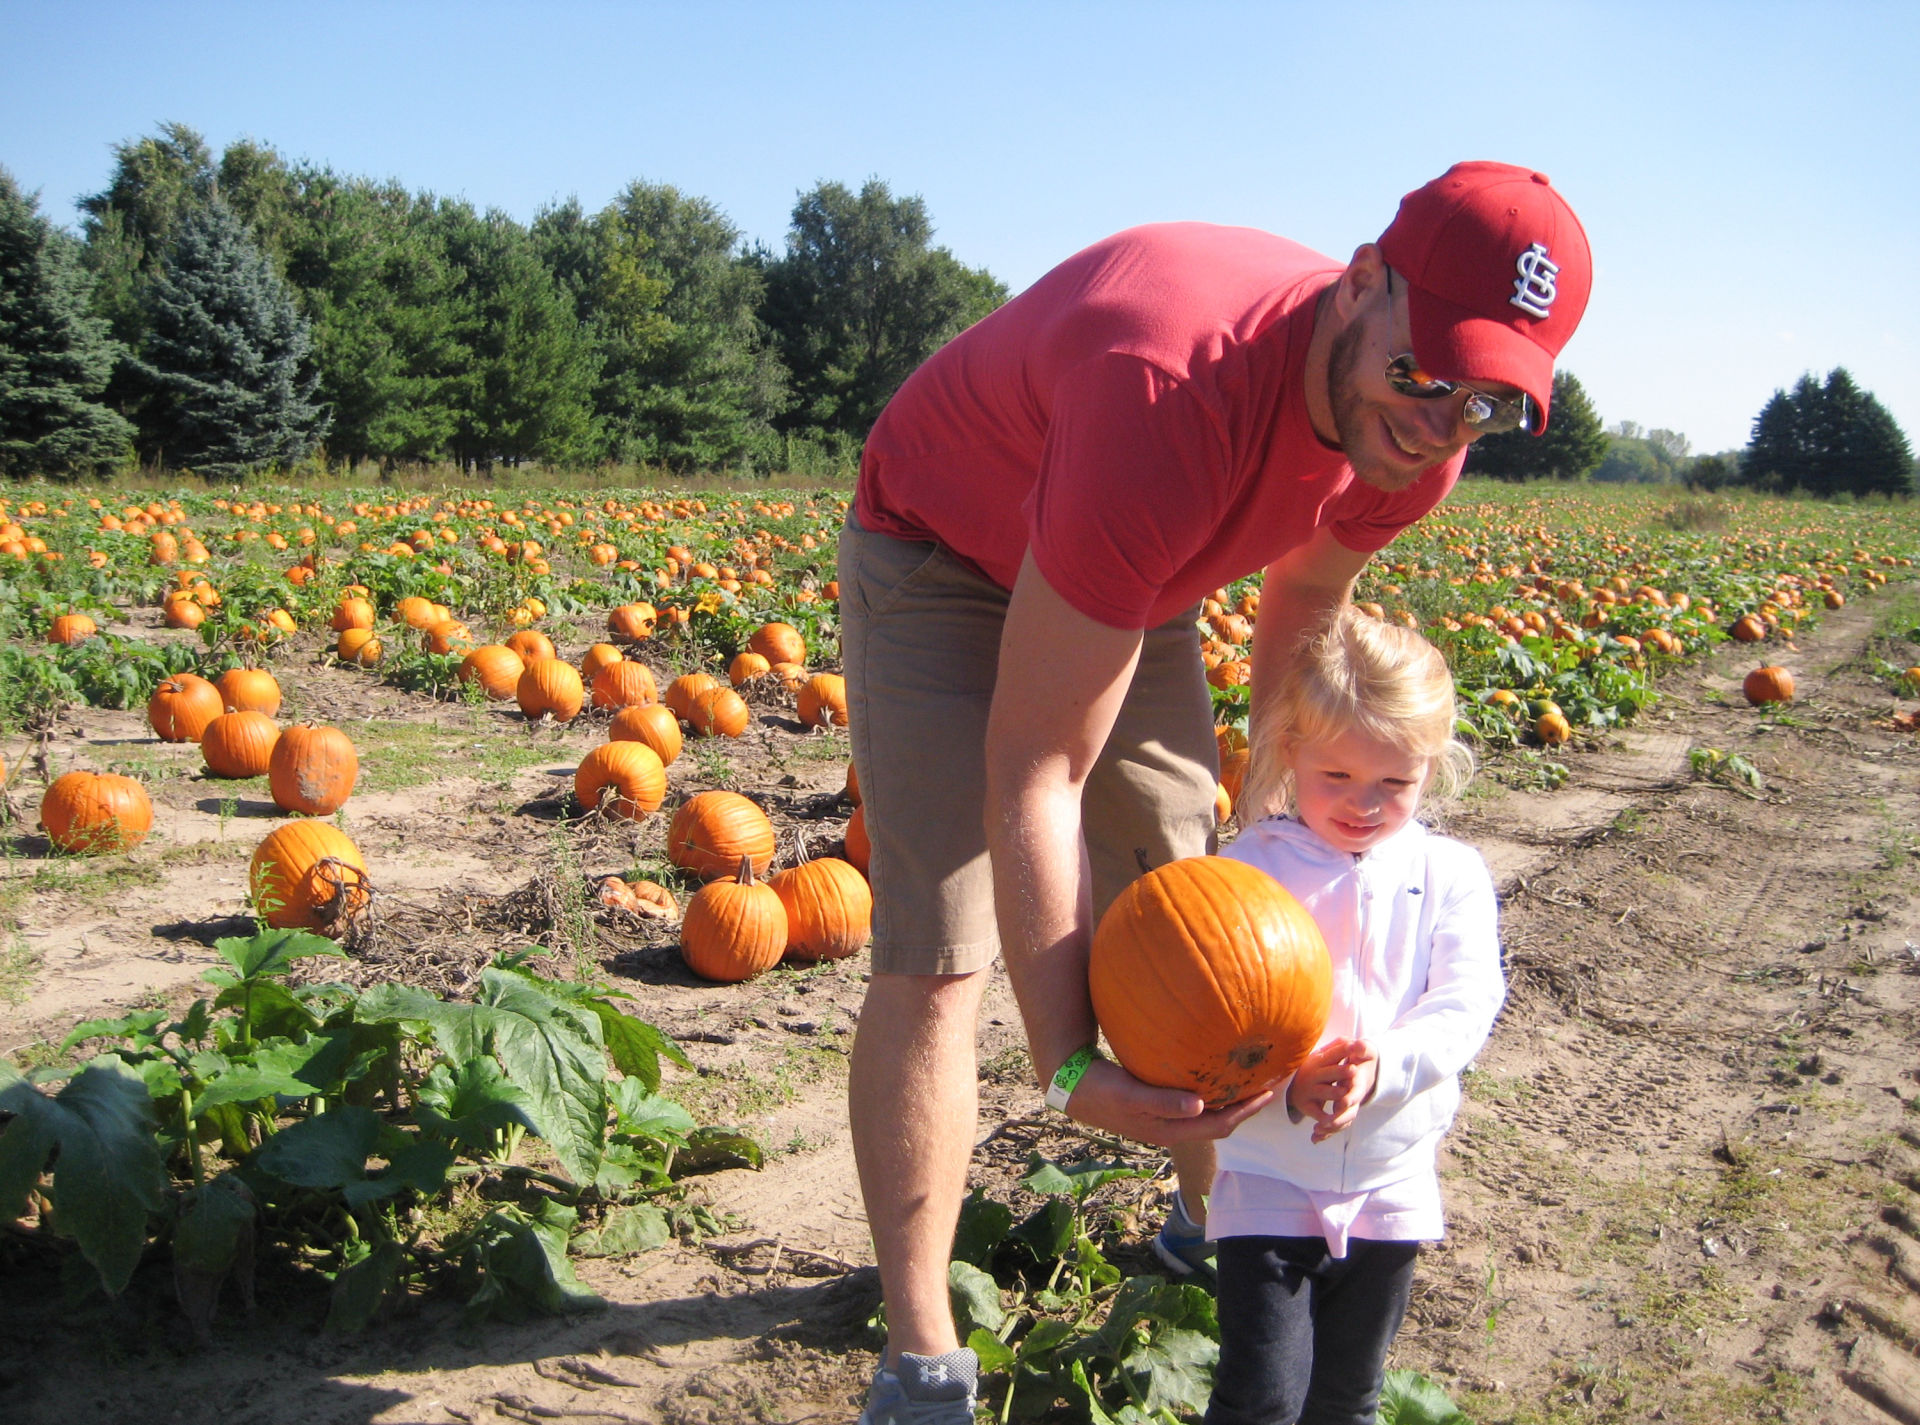 Kevin Coppinger took his nearly 3-year-old daughter, Mae, to choose a pumpkin at Waldoch Farm. The farm added a corn maze about five years ago. Owner Doug Joyer says adding such attractions has allowed him to live solely off income from the farm.